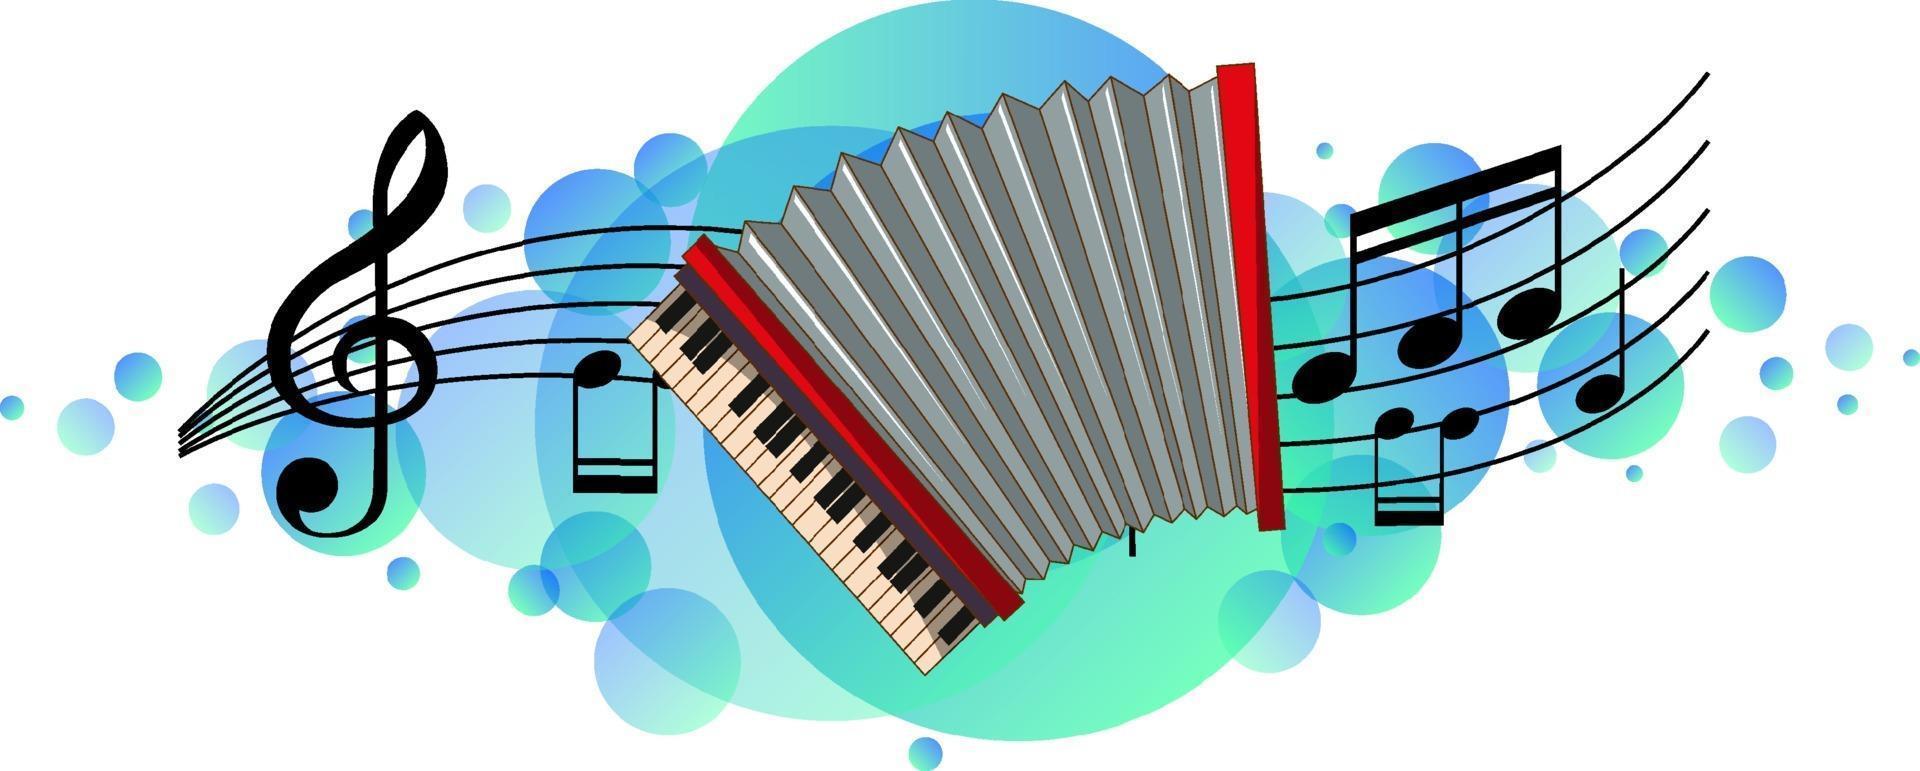 Accordion musical instrument with melody symbols on sky blue splotch vector